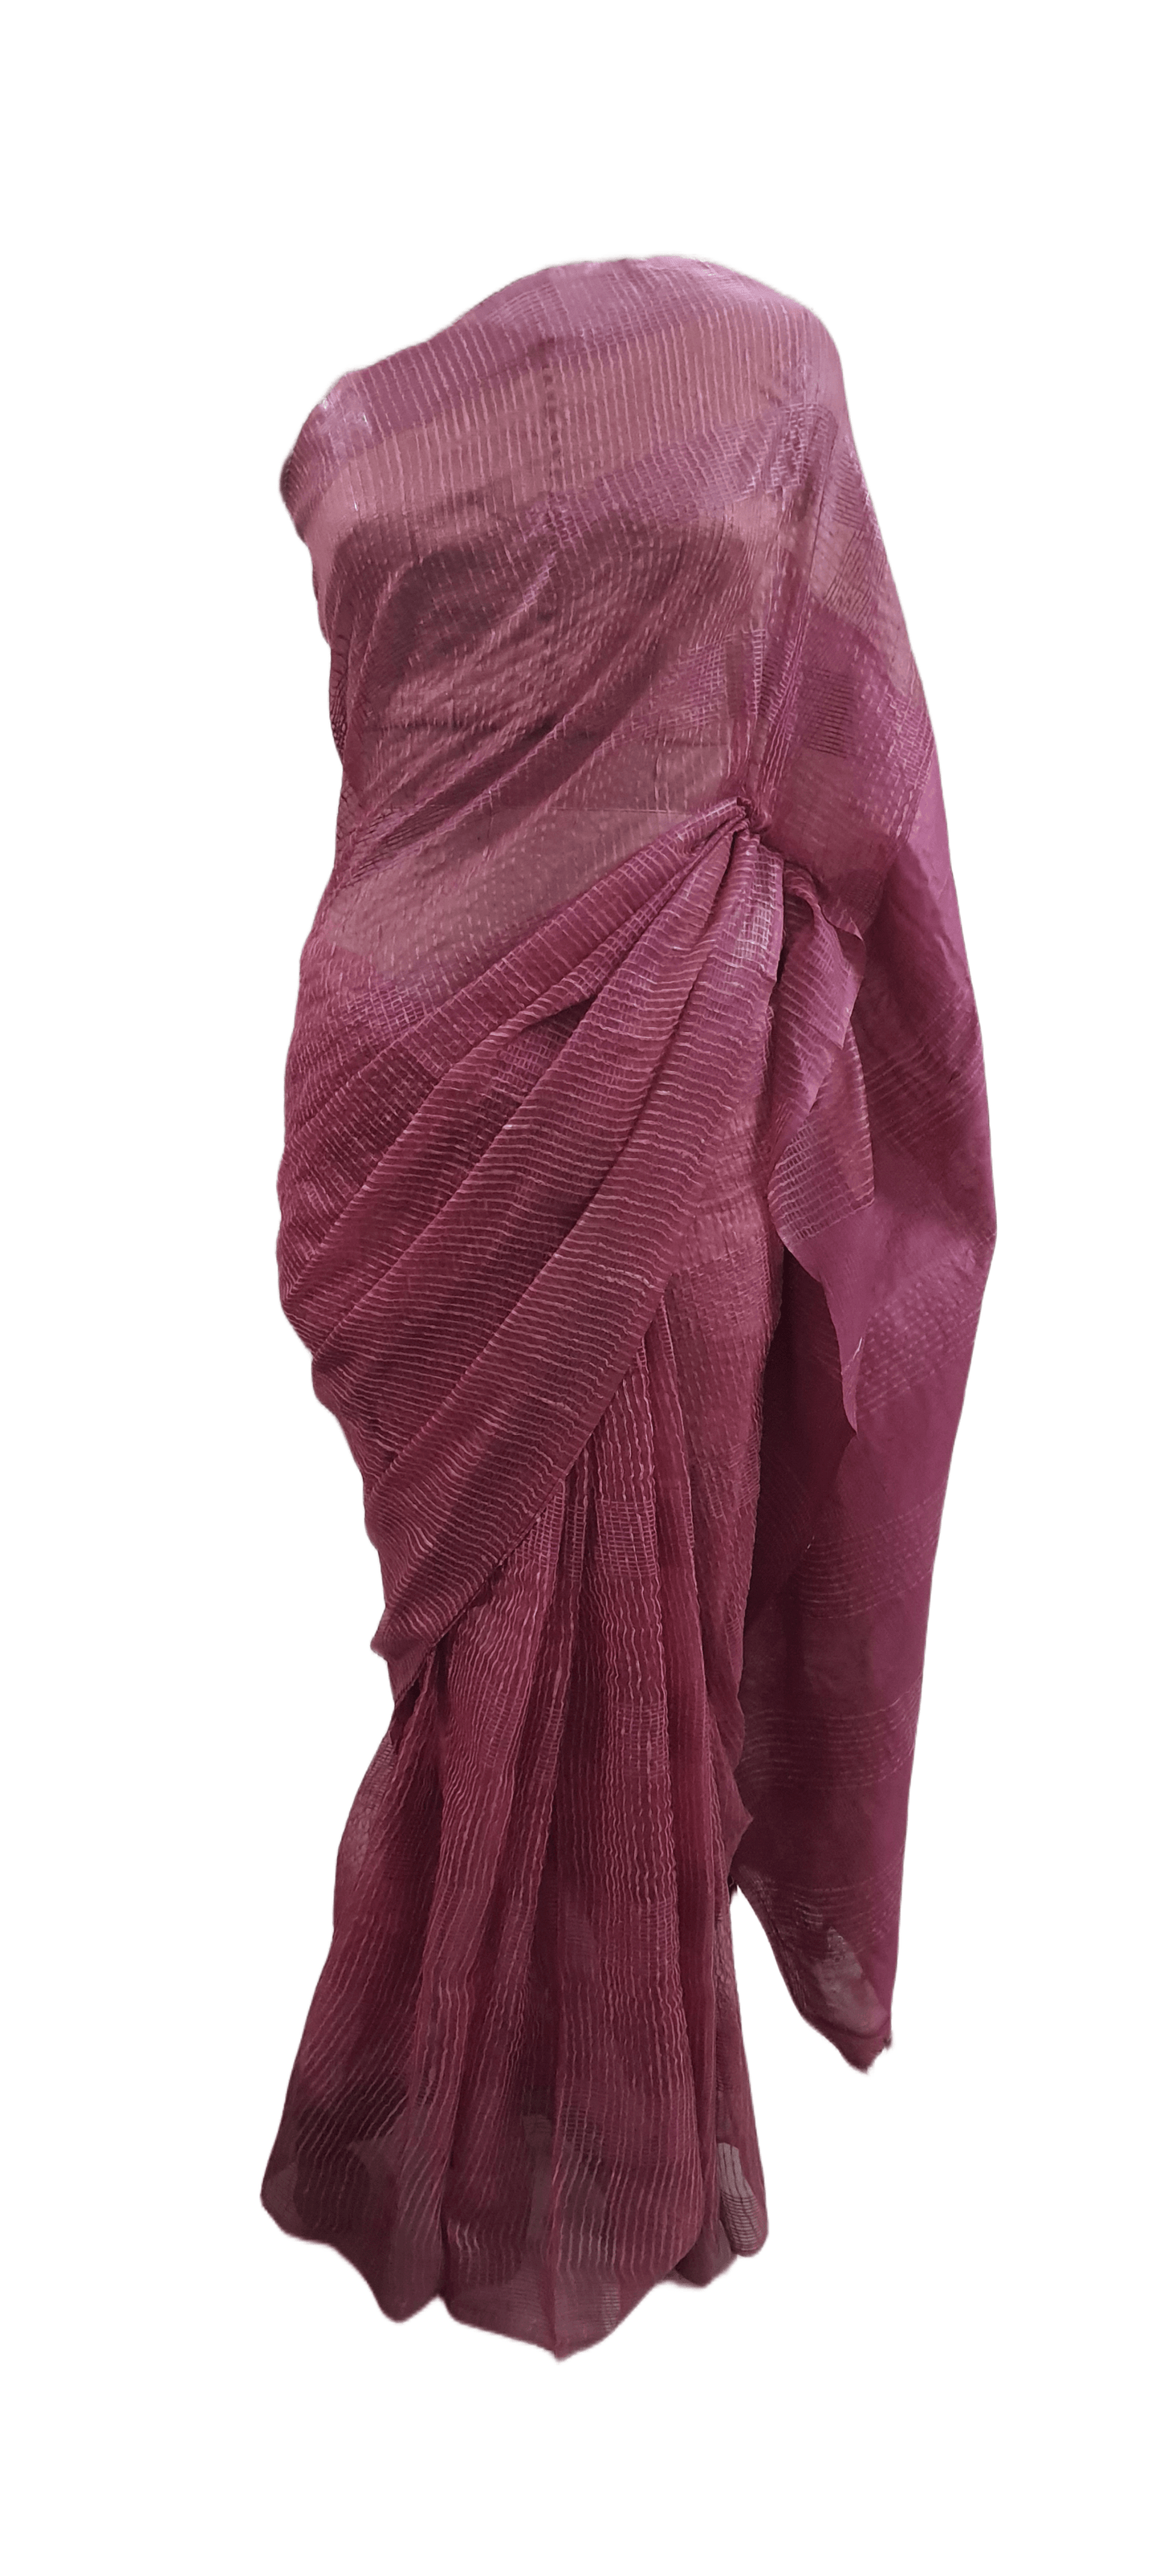 Onion Pink Katan Ghicha Saree with Pure Ikkat Cotton Blouse KG06 - Ethnic's By Anvi Creations